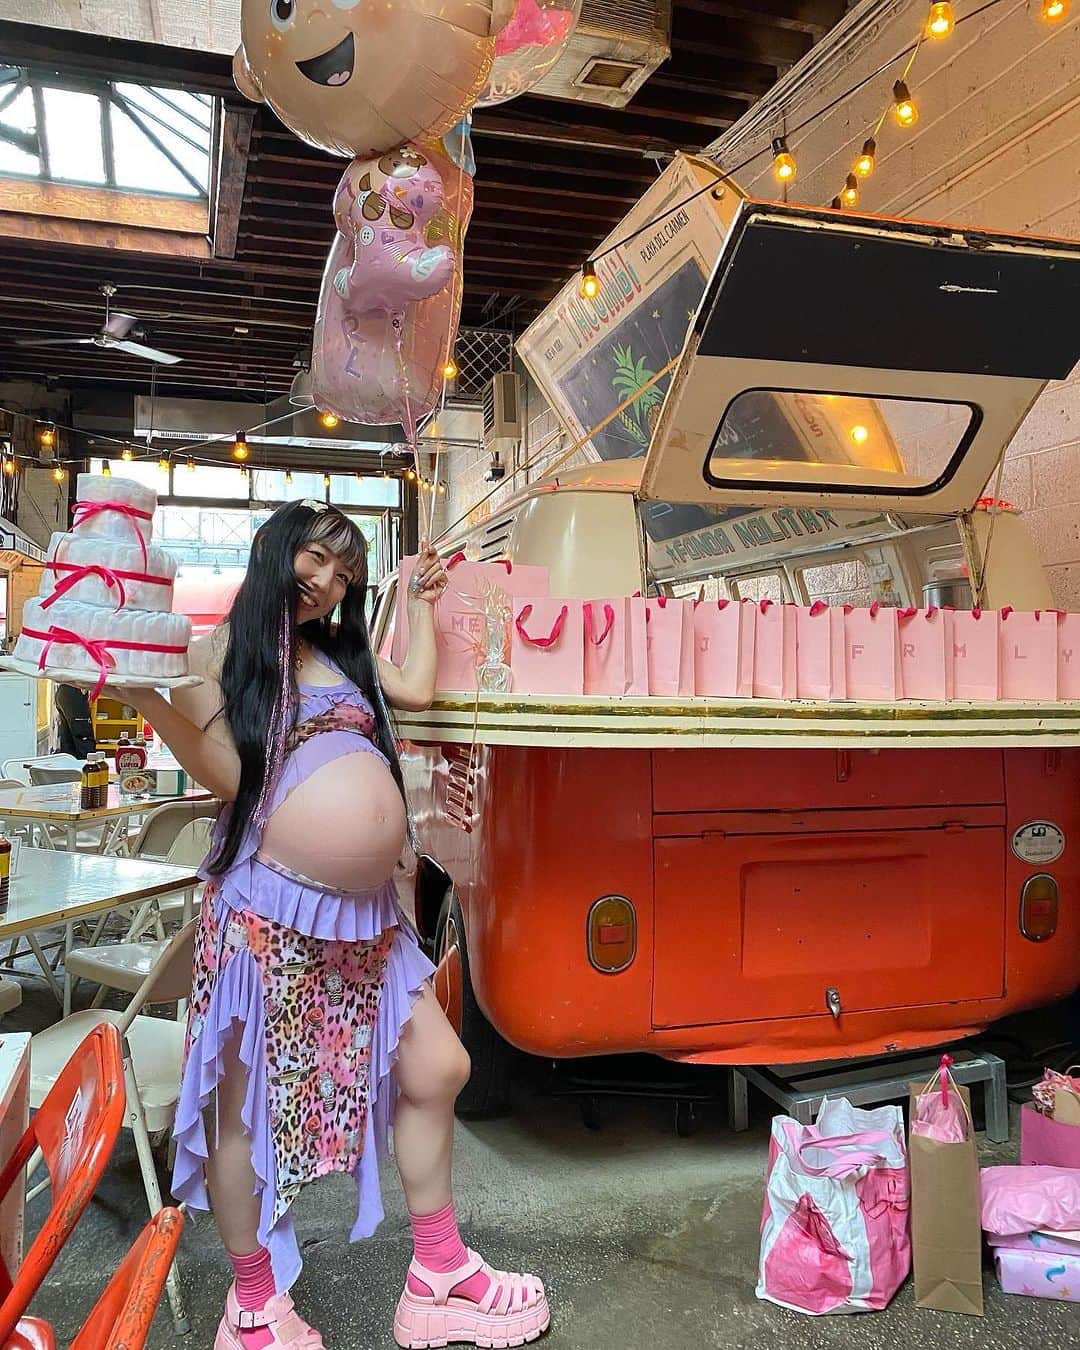 Mei Kawajiriのインスタグラム：「Mei’s Baby shower🚿🍓🤍🌮 (just let u know , I thought baby shower is taking shower 🚿 with baby🤣 )  I felt loved by my sweet friends and also realized the time will come soon🥰😍😇 I feel Baby is so happy already🍒💕 Thank you for coming to the dinner also Big thanks to @tacombi such  delicious 🌮 tacos for us❤️ and also special thanks to @avarosebd @becosss @mmmlw to make this happen🍓💜✨🎂🩷❣️ / Photog by @nextsubject 📸」